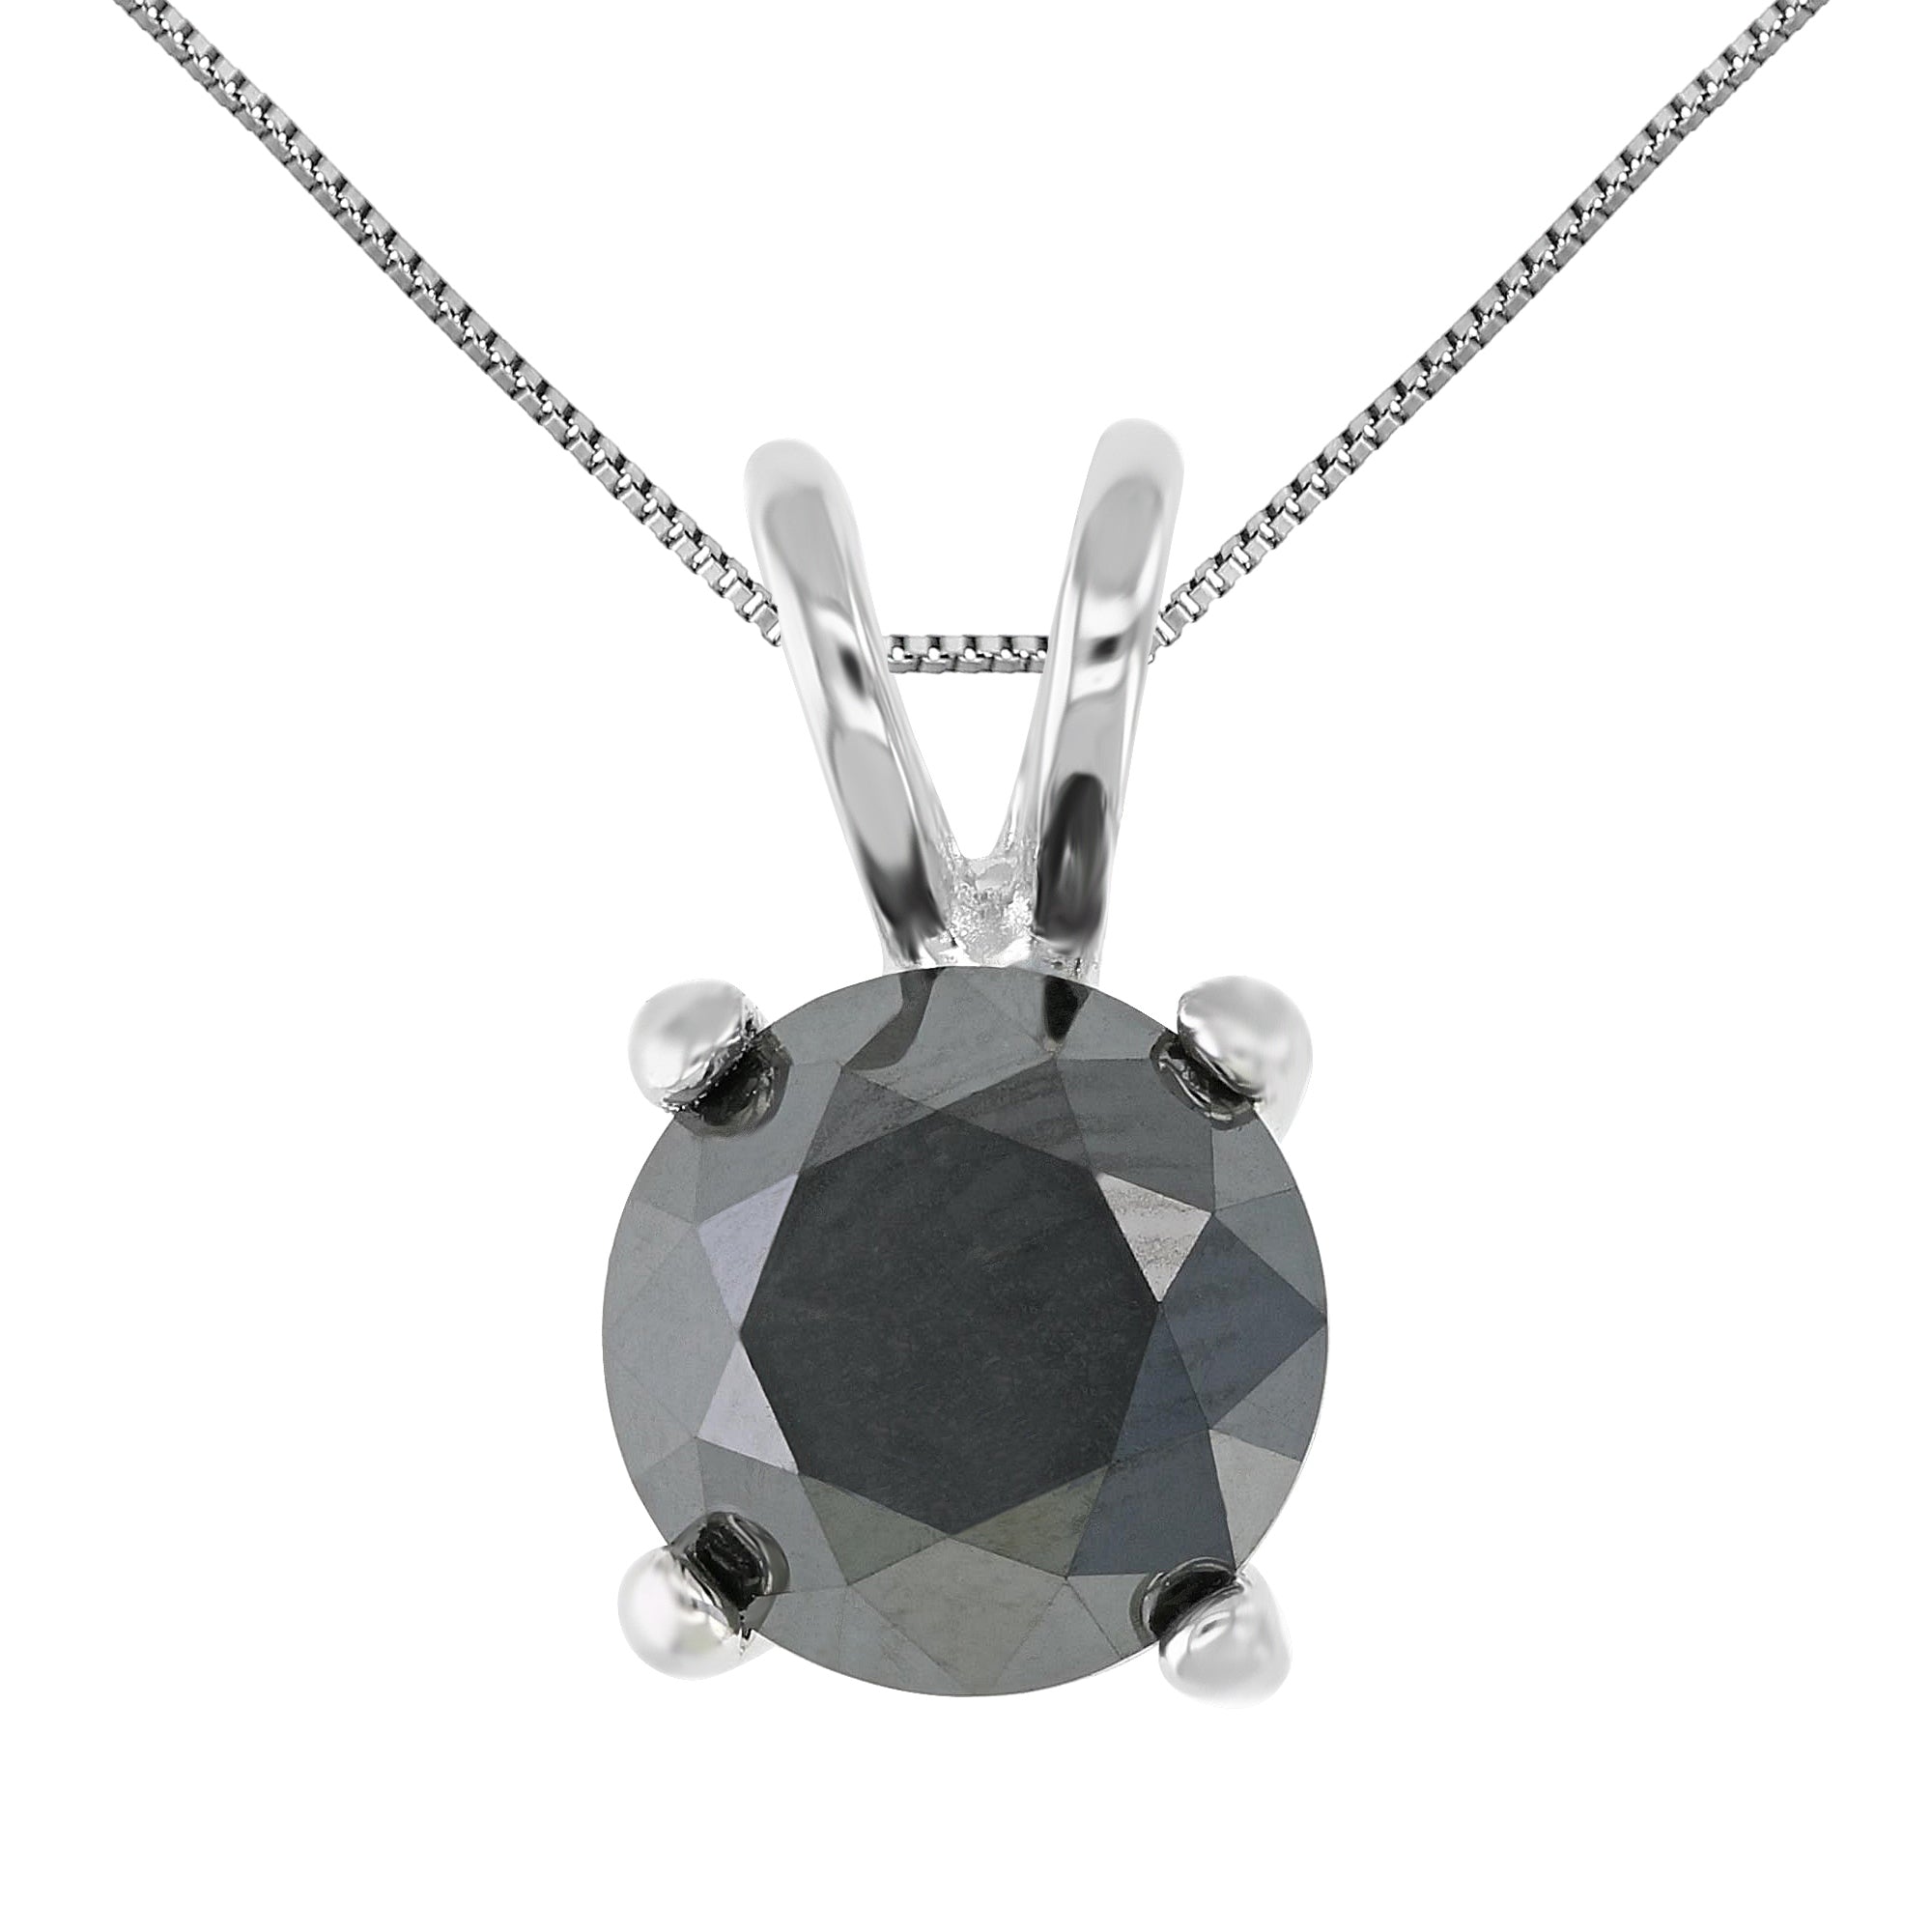 8 cttw Diamond Pendant, Black Diamond Solitaire Pendant Necklace for Women in .925 Sterling Silver with Rhodium, 18 Inch Chain, Prong Setting